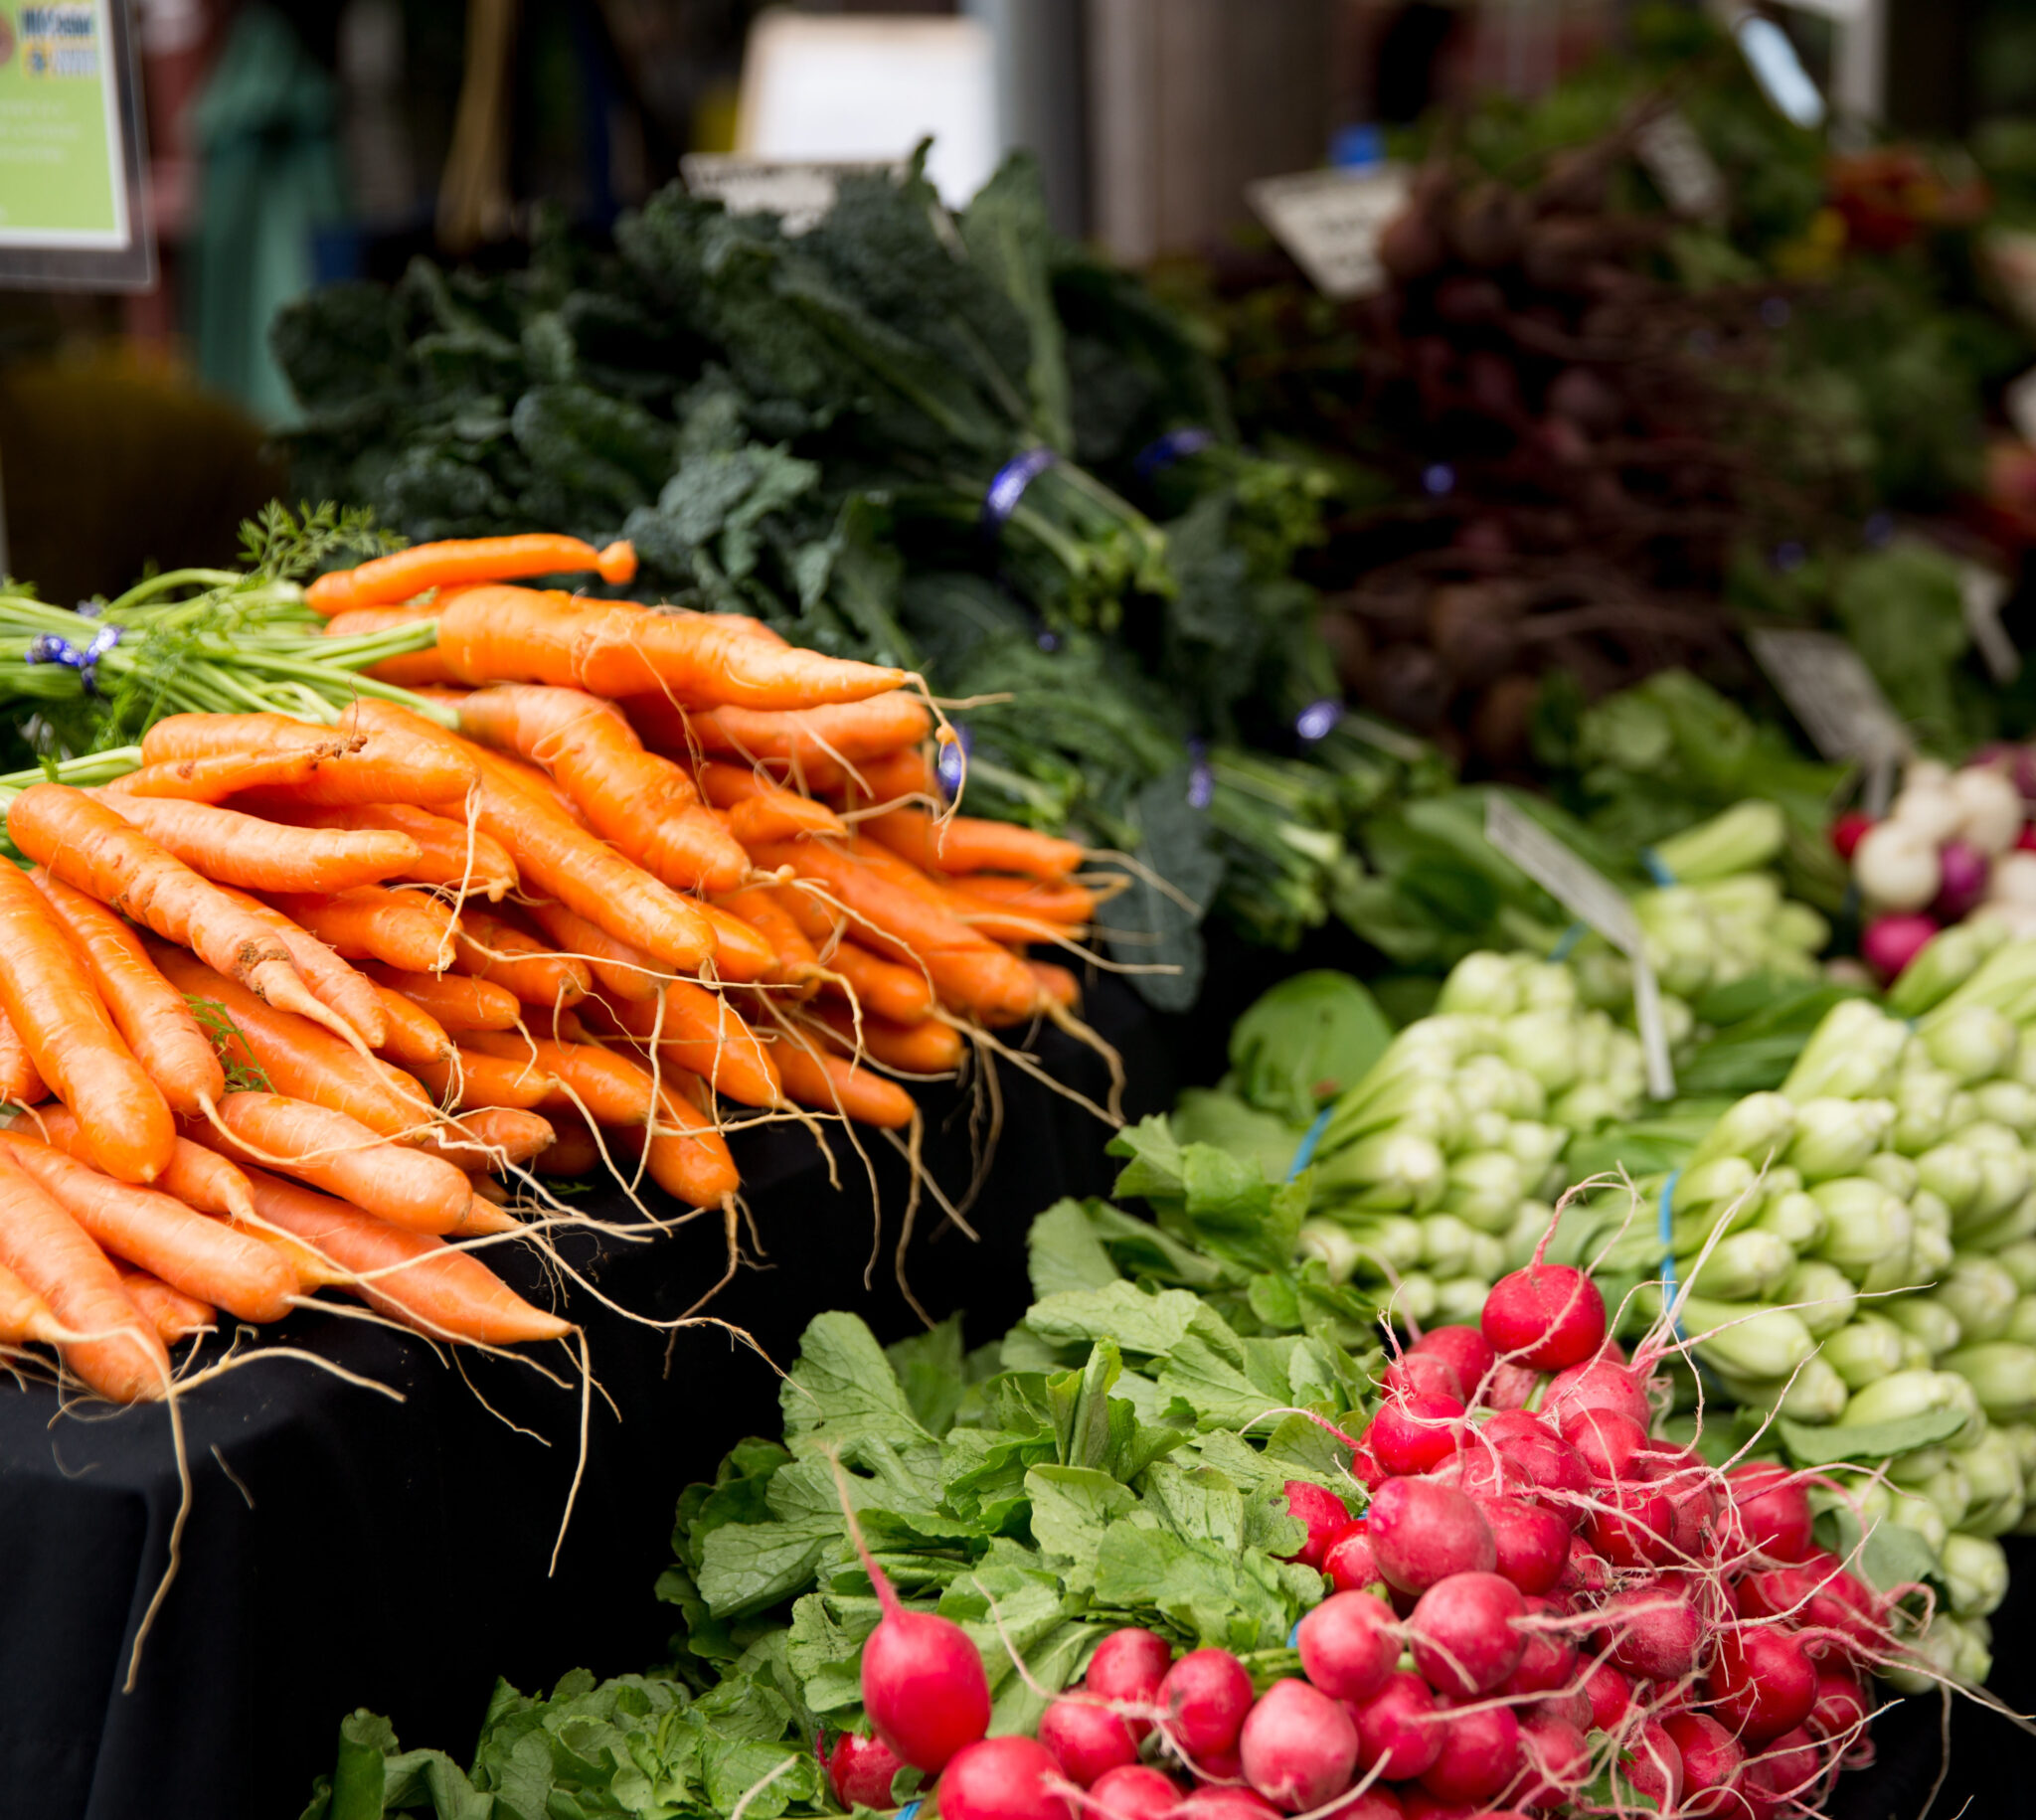 Fresh carrots, radishes, and leafy greens are piled up next to each other.